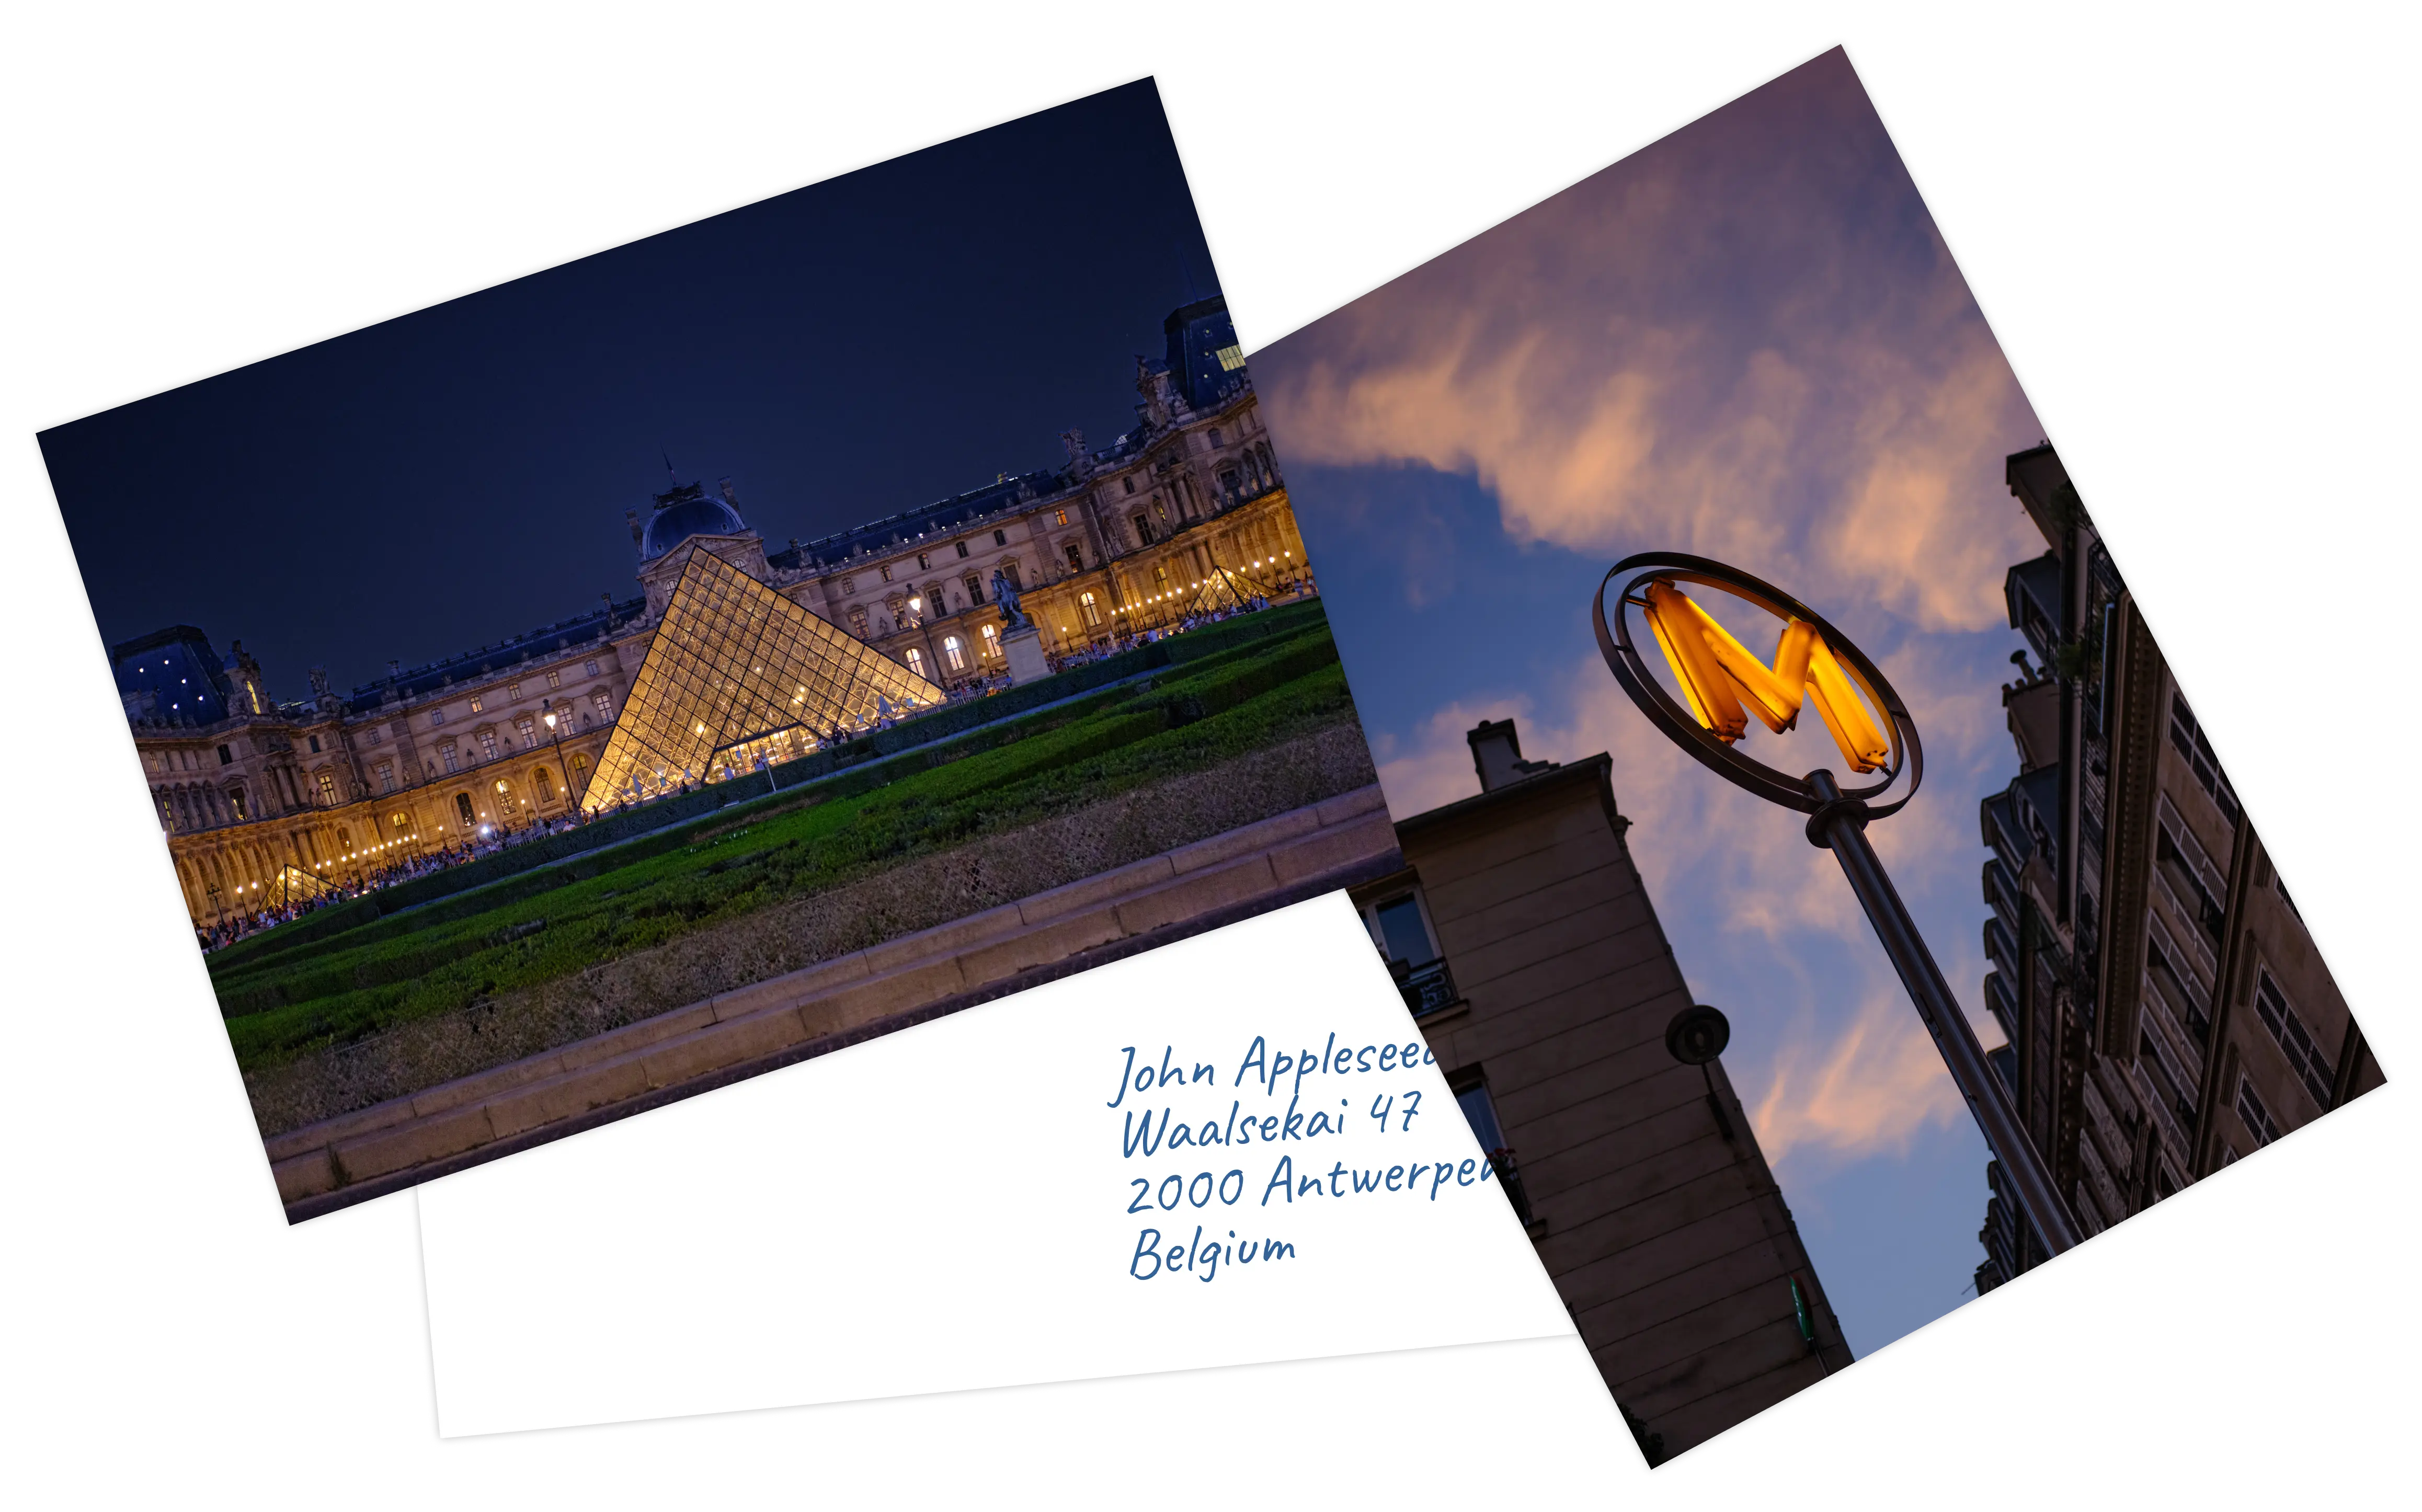 Three postcards. One shows The Louvre Museum, another shows the Paris Metro sign and the third one is upside down.